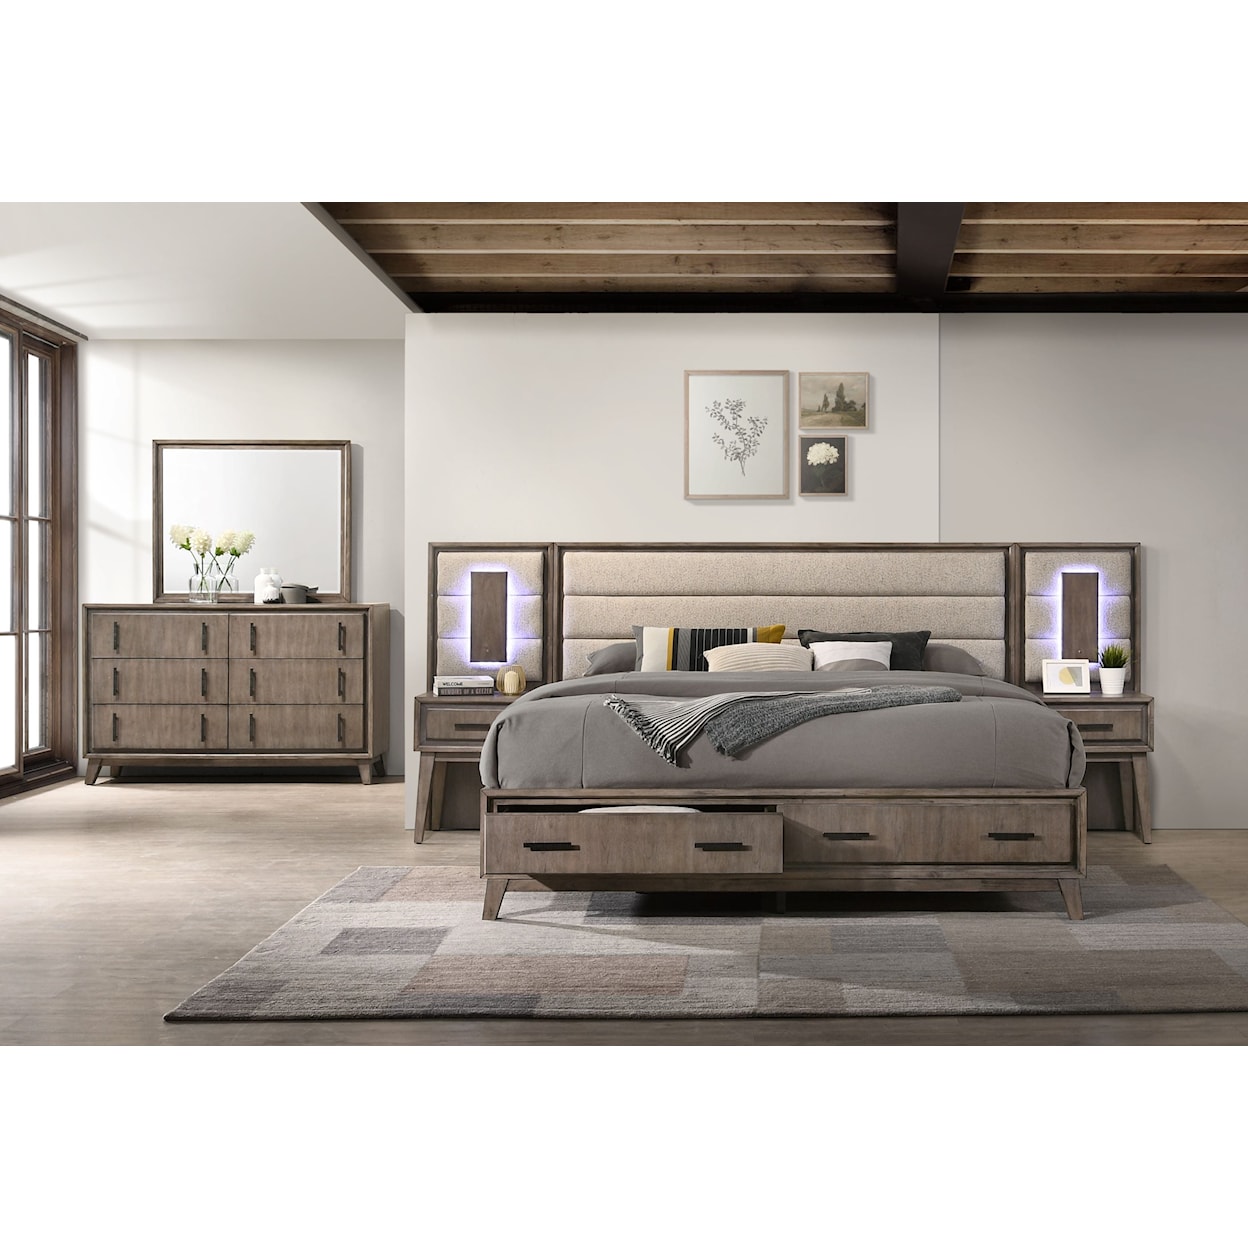 Alex's Furniture 8422A Queen Wall Bed